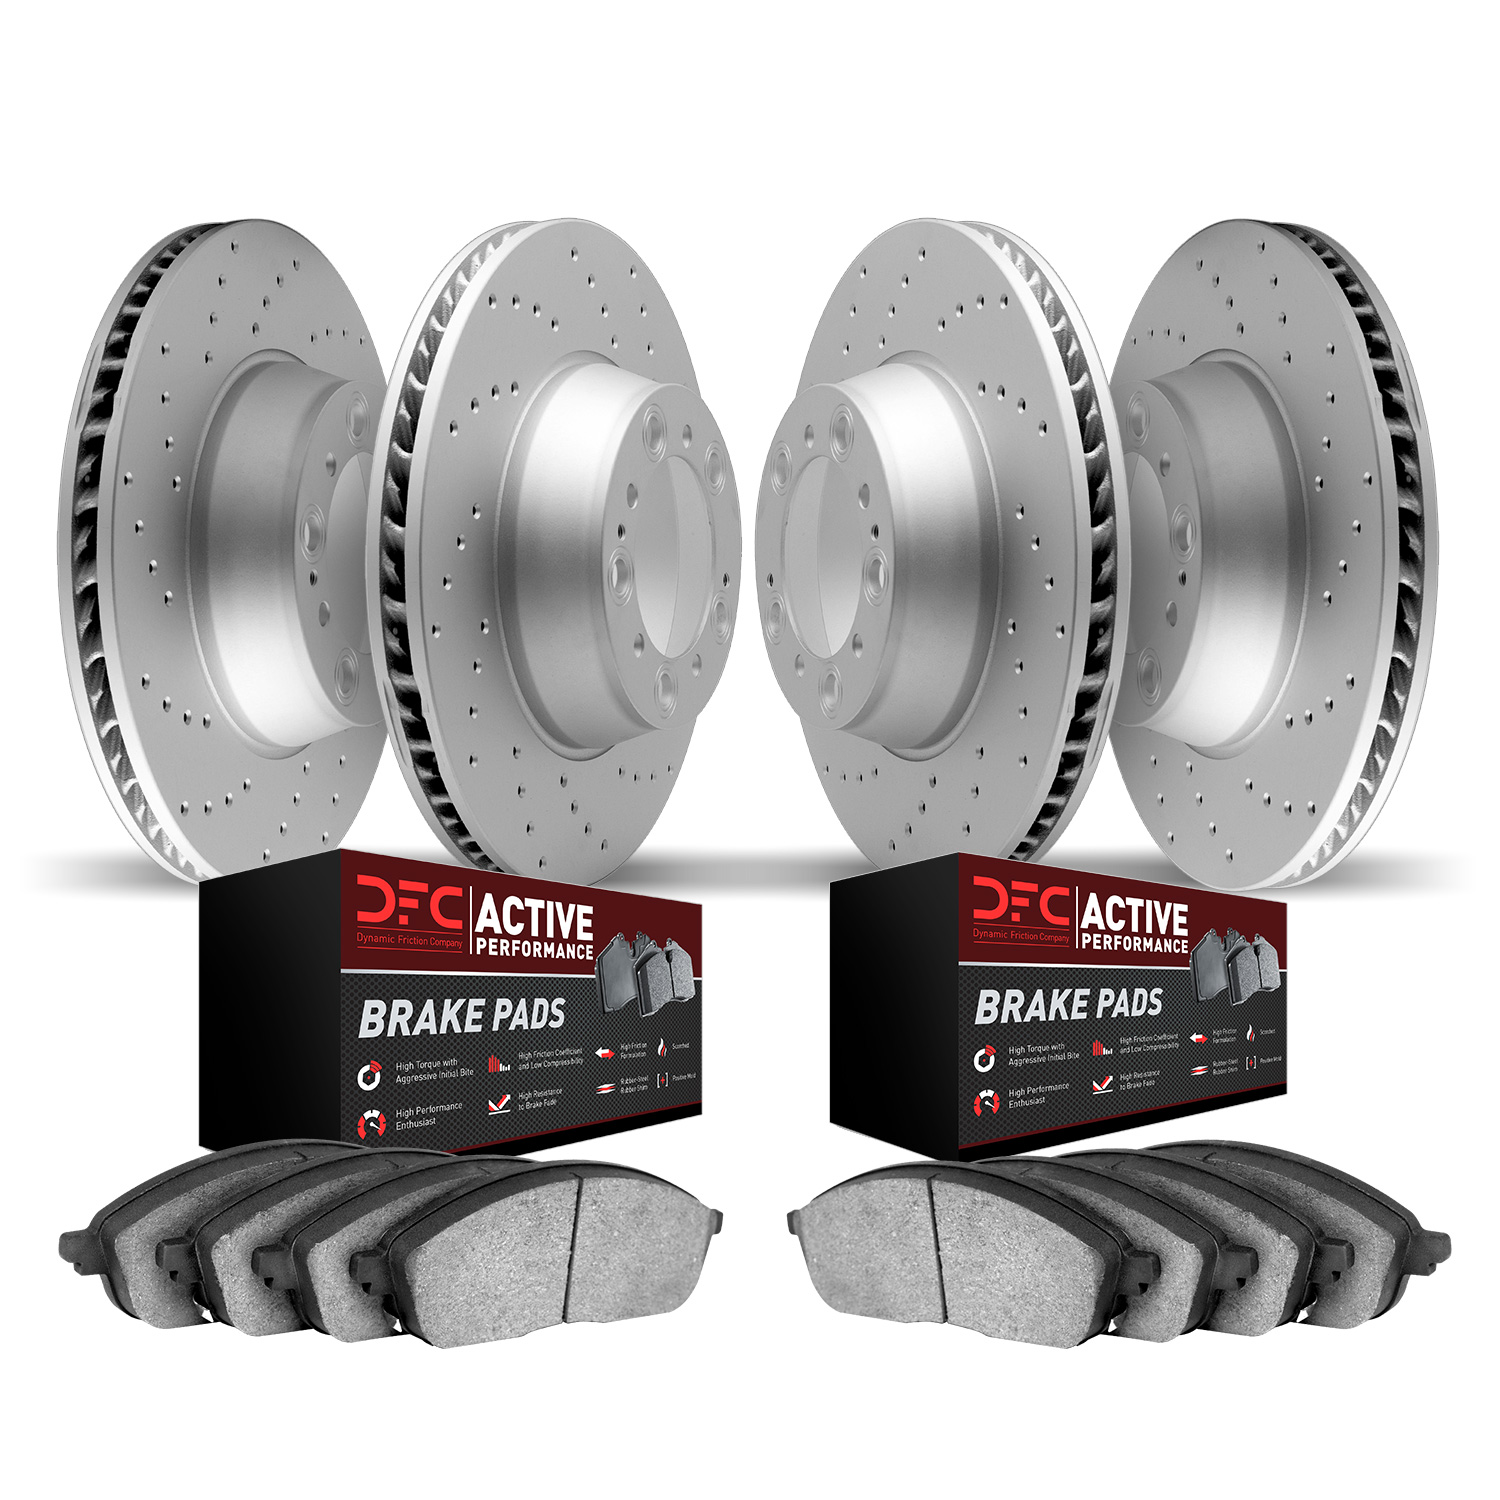 2704-31038 Geoperformance Drilled Brake Rotors with Active Performance Pads Kit, 2001-2005 BMW, Position: Front and Rear